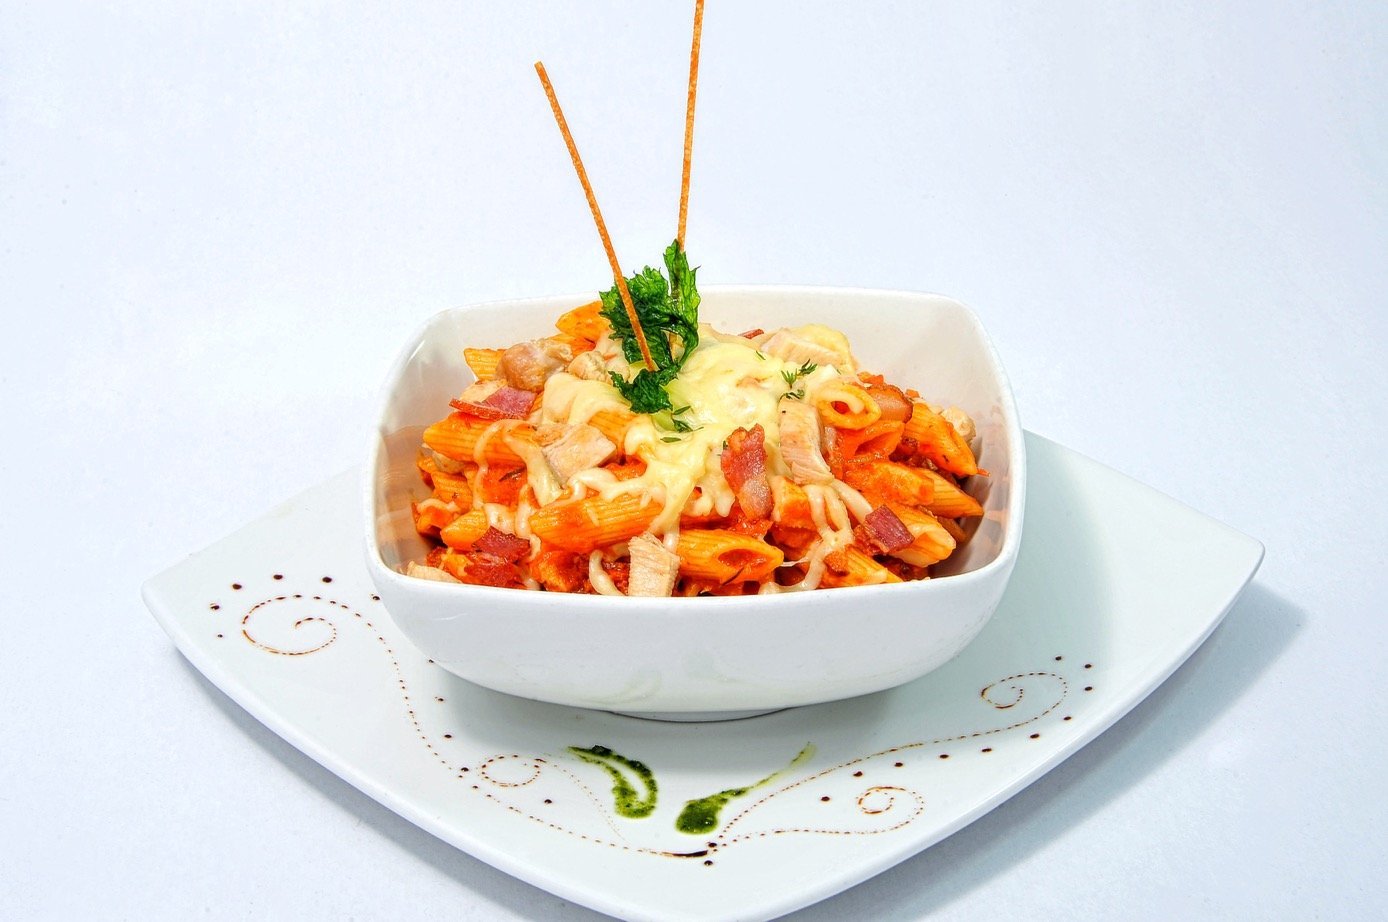 Penne Rigate with chicken